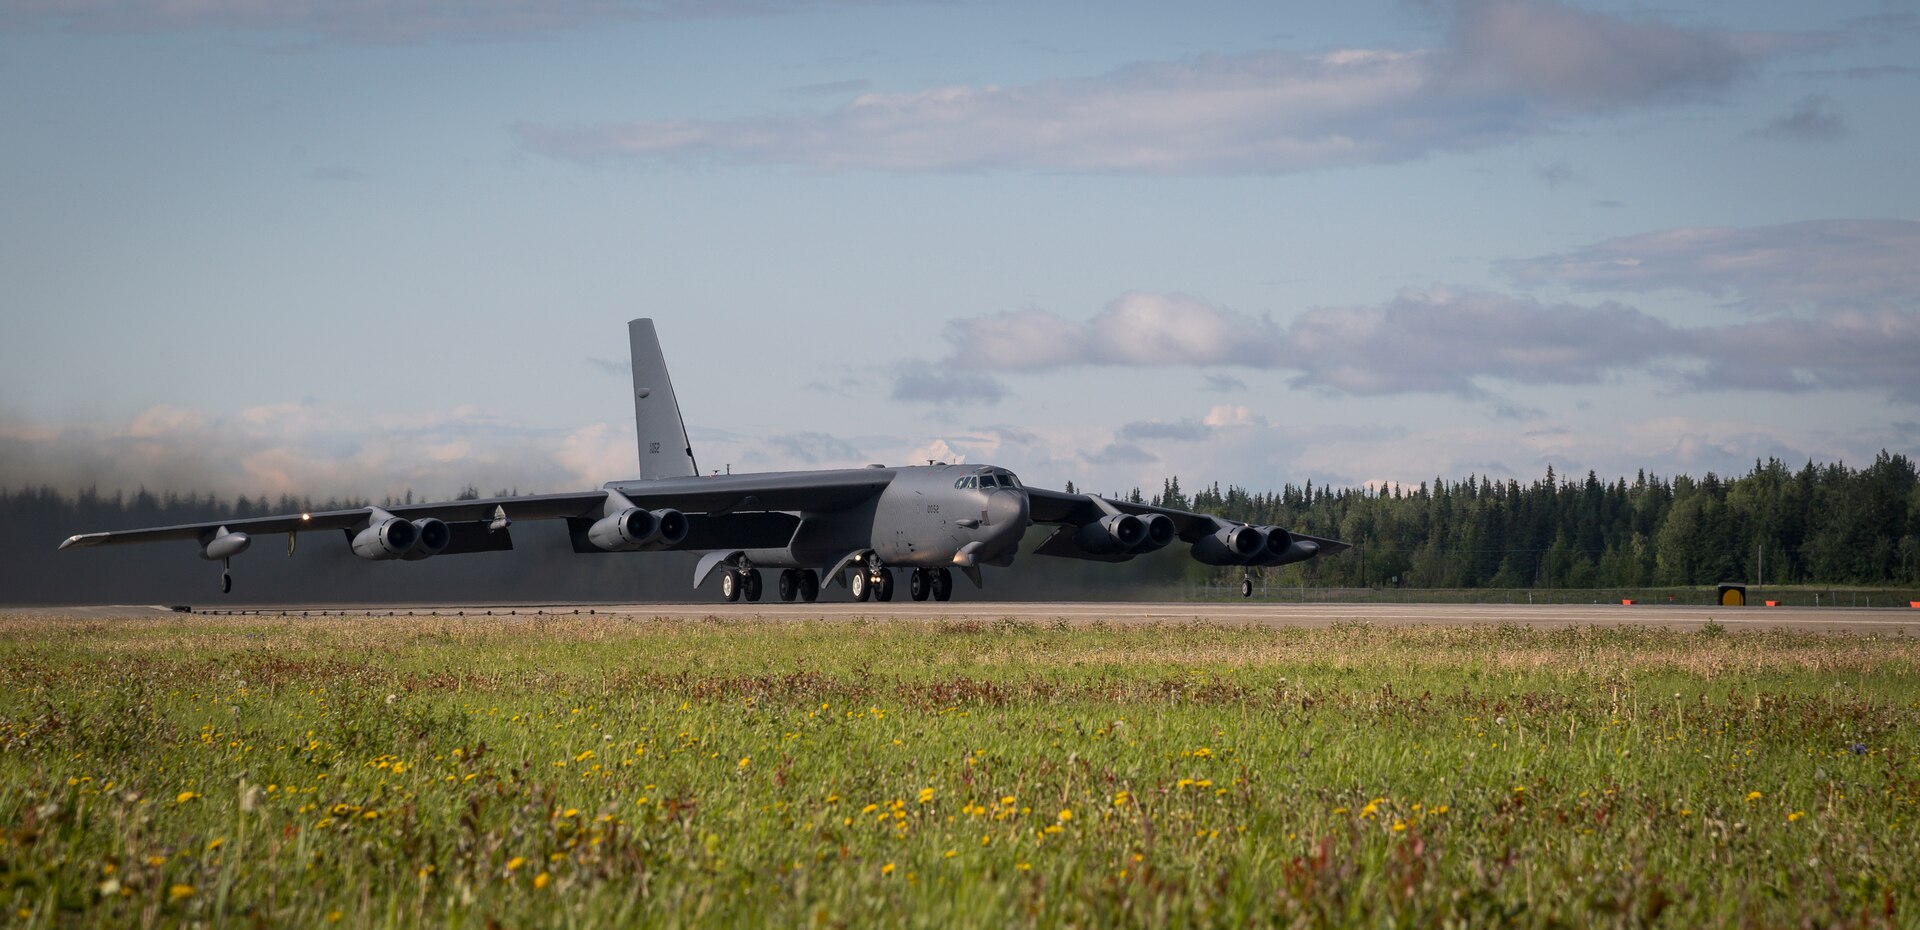 A B-52H Stratofortress deployed from Barksdale Air Force Base, La., takes off from Eielson Air Force Base, Alaska, for a Bomber Task Force mission, June 16, 2020. Strategic bomber missions demonstrate the credibility of our forces to address a diverse and uncertain security environment. (U.S. Air Force photo by Senior Airman Lillian Miller)